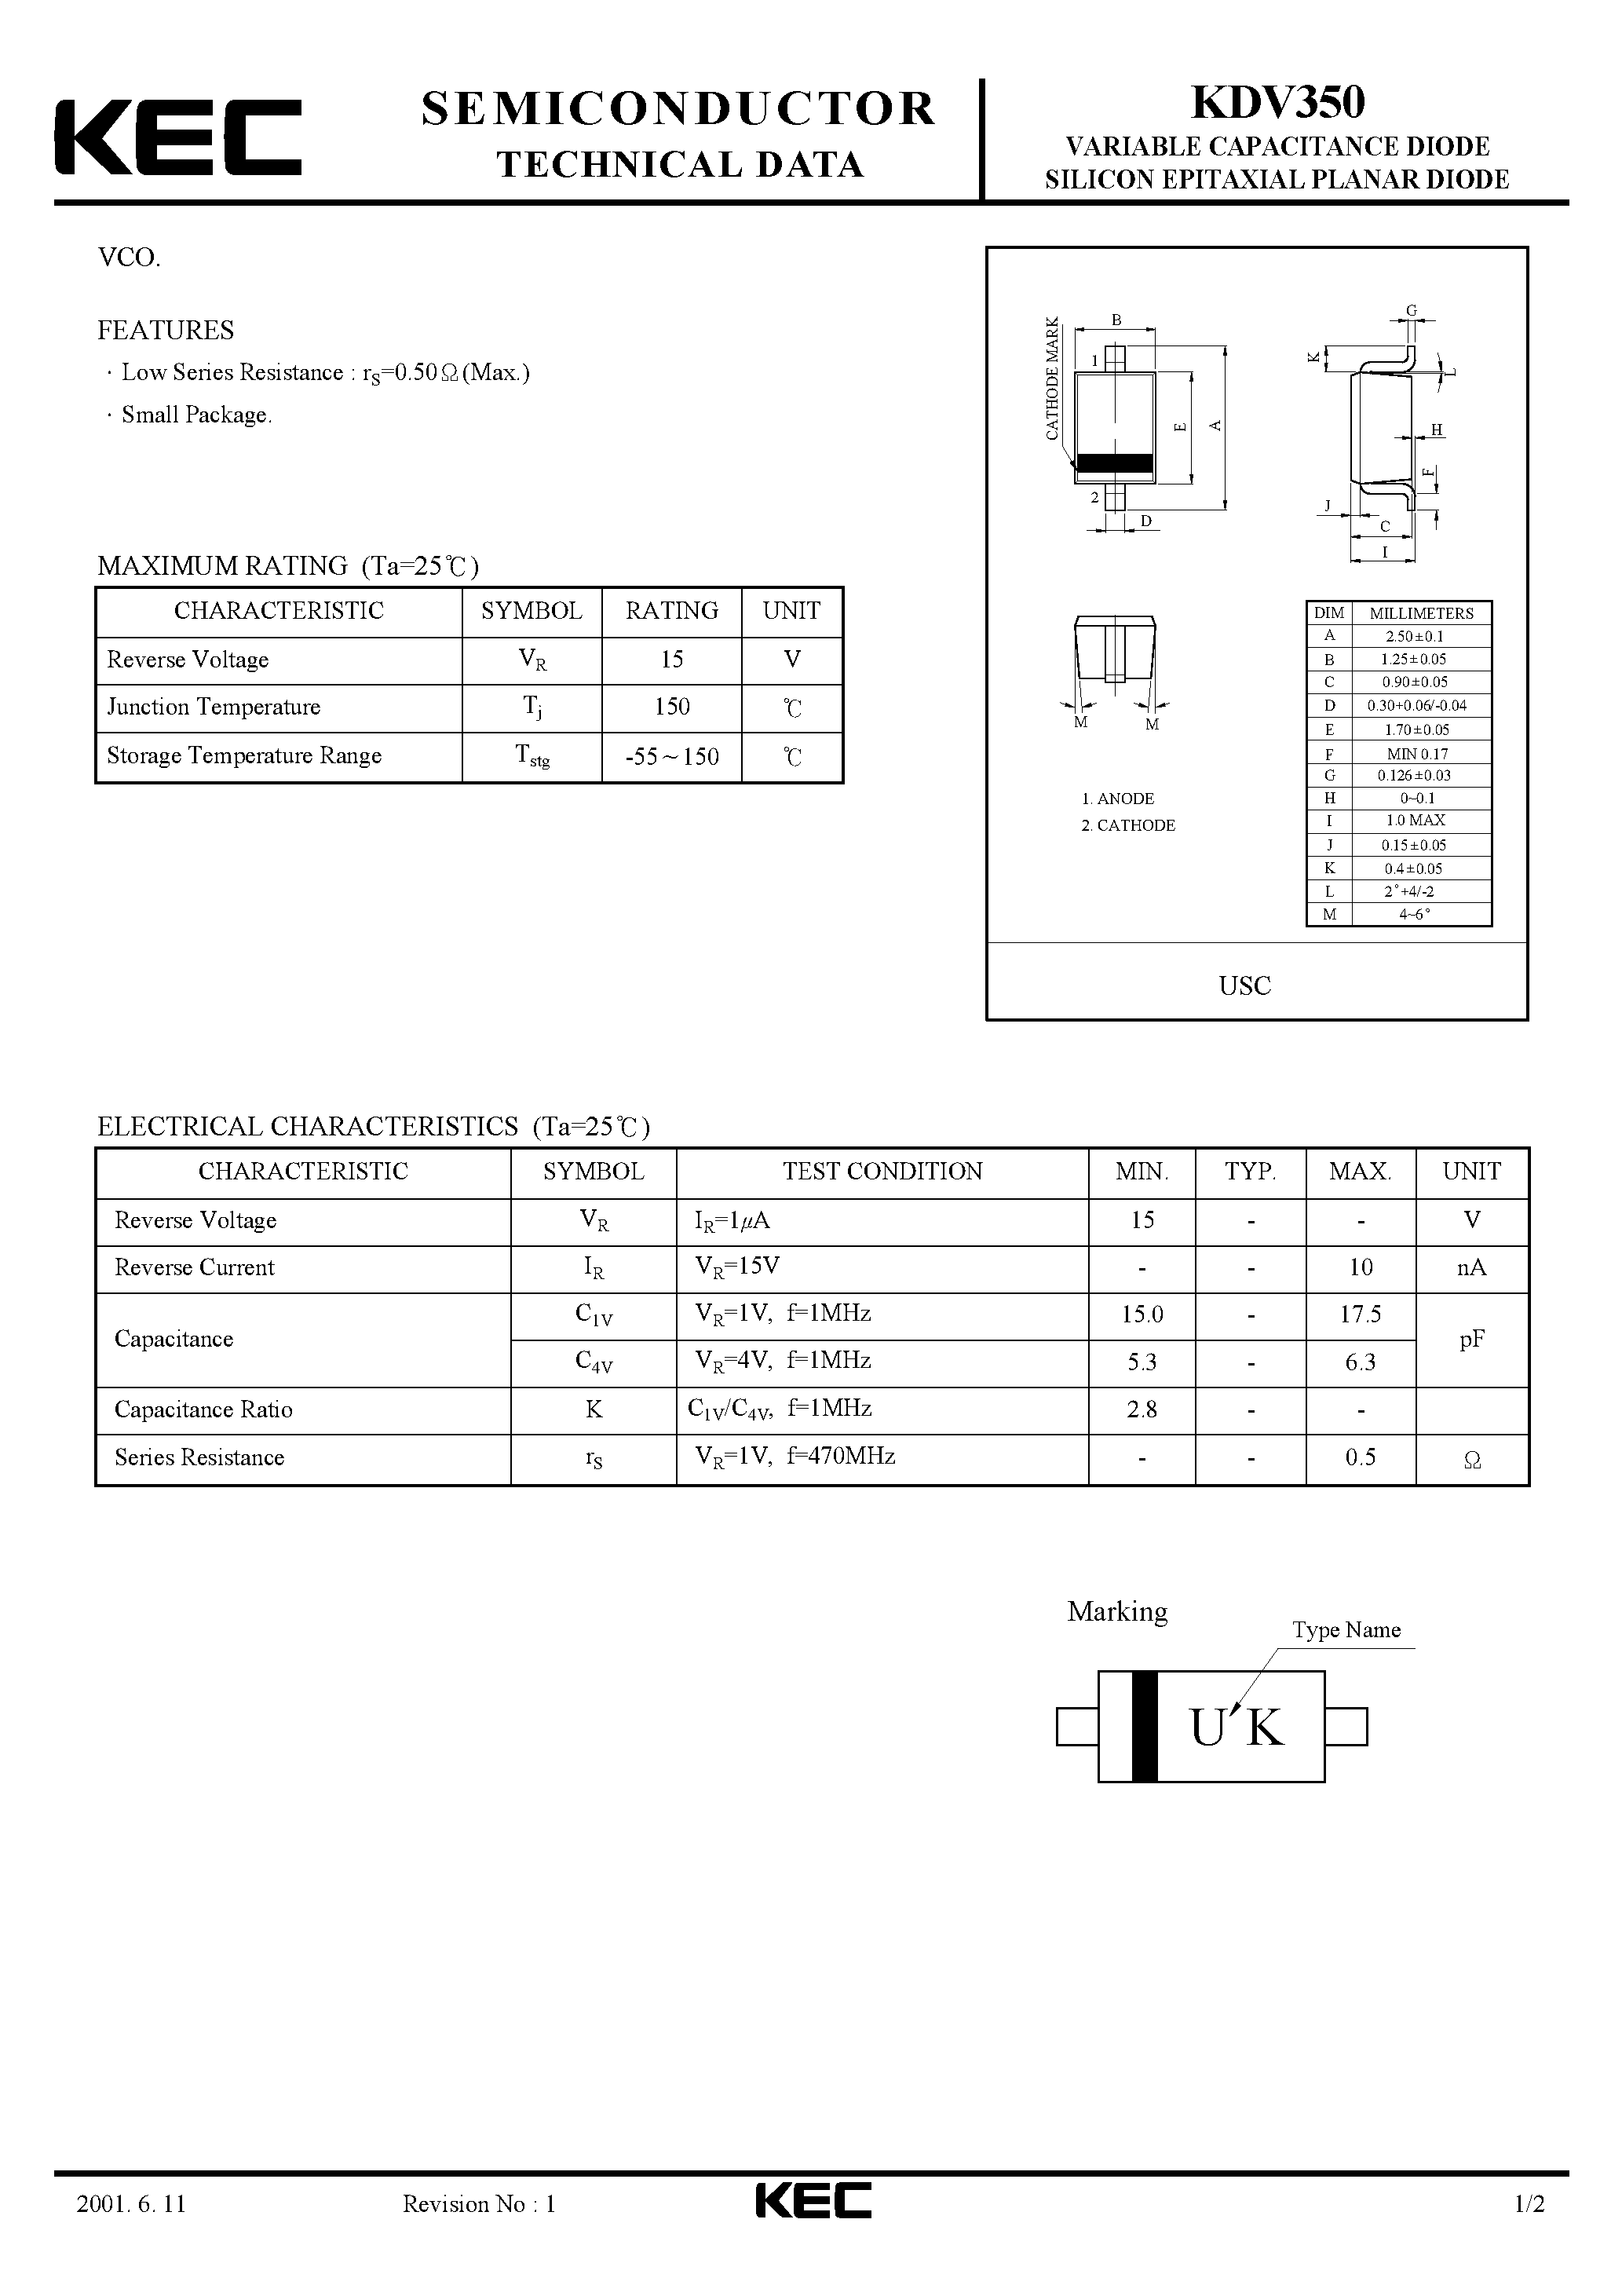 Даташит KDV350 - VARIABLE CAPACITANCE DIODE SILICON EPITAXIAL PLANAR DIODE(VCO) страница 1